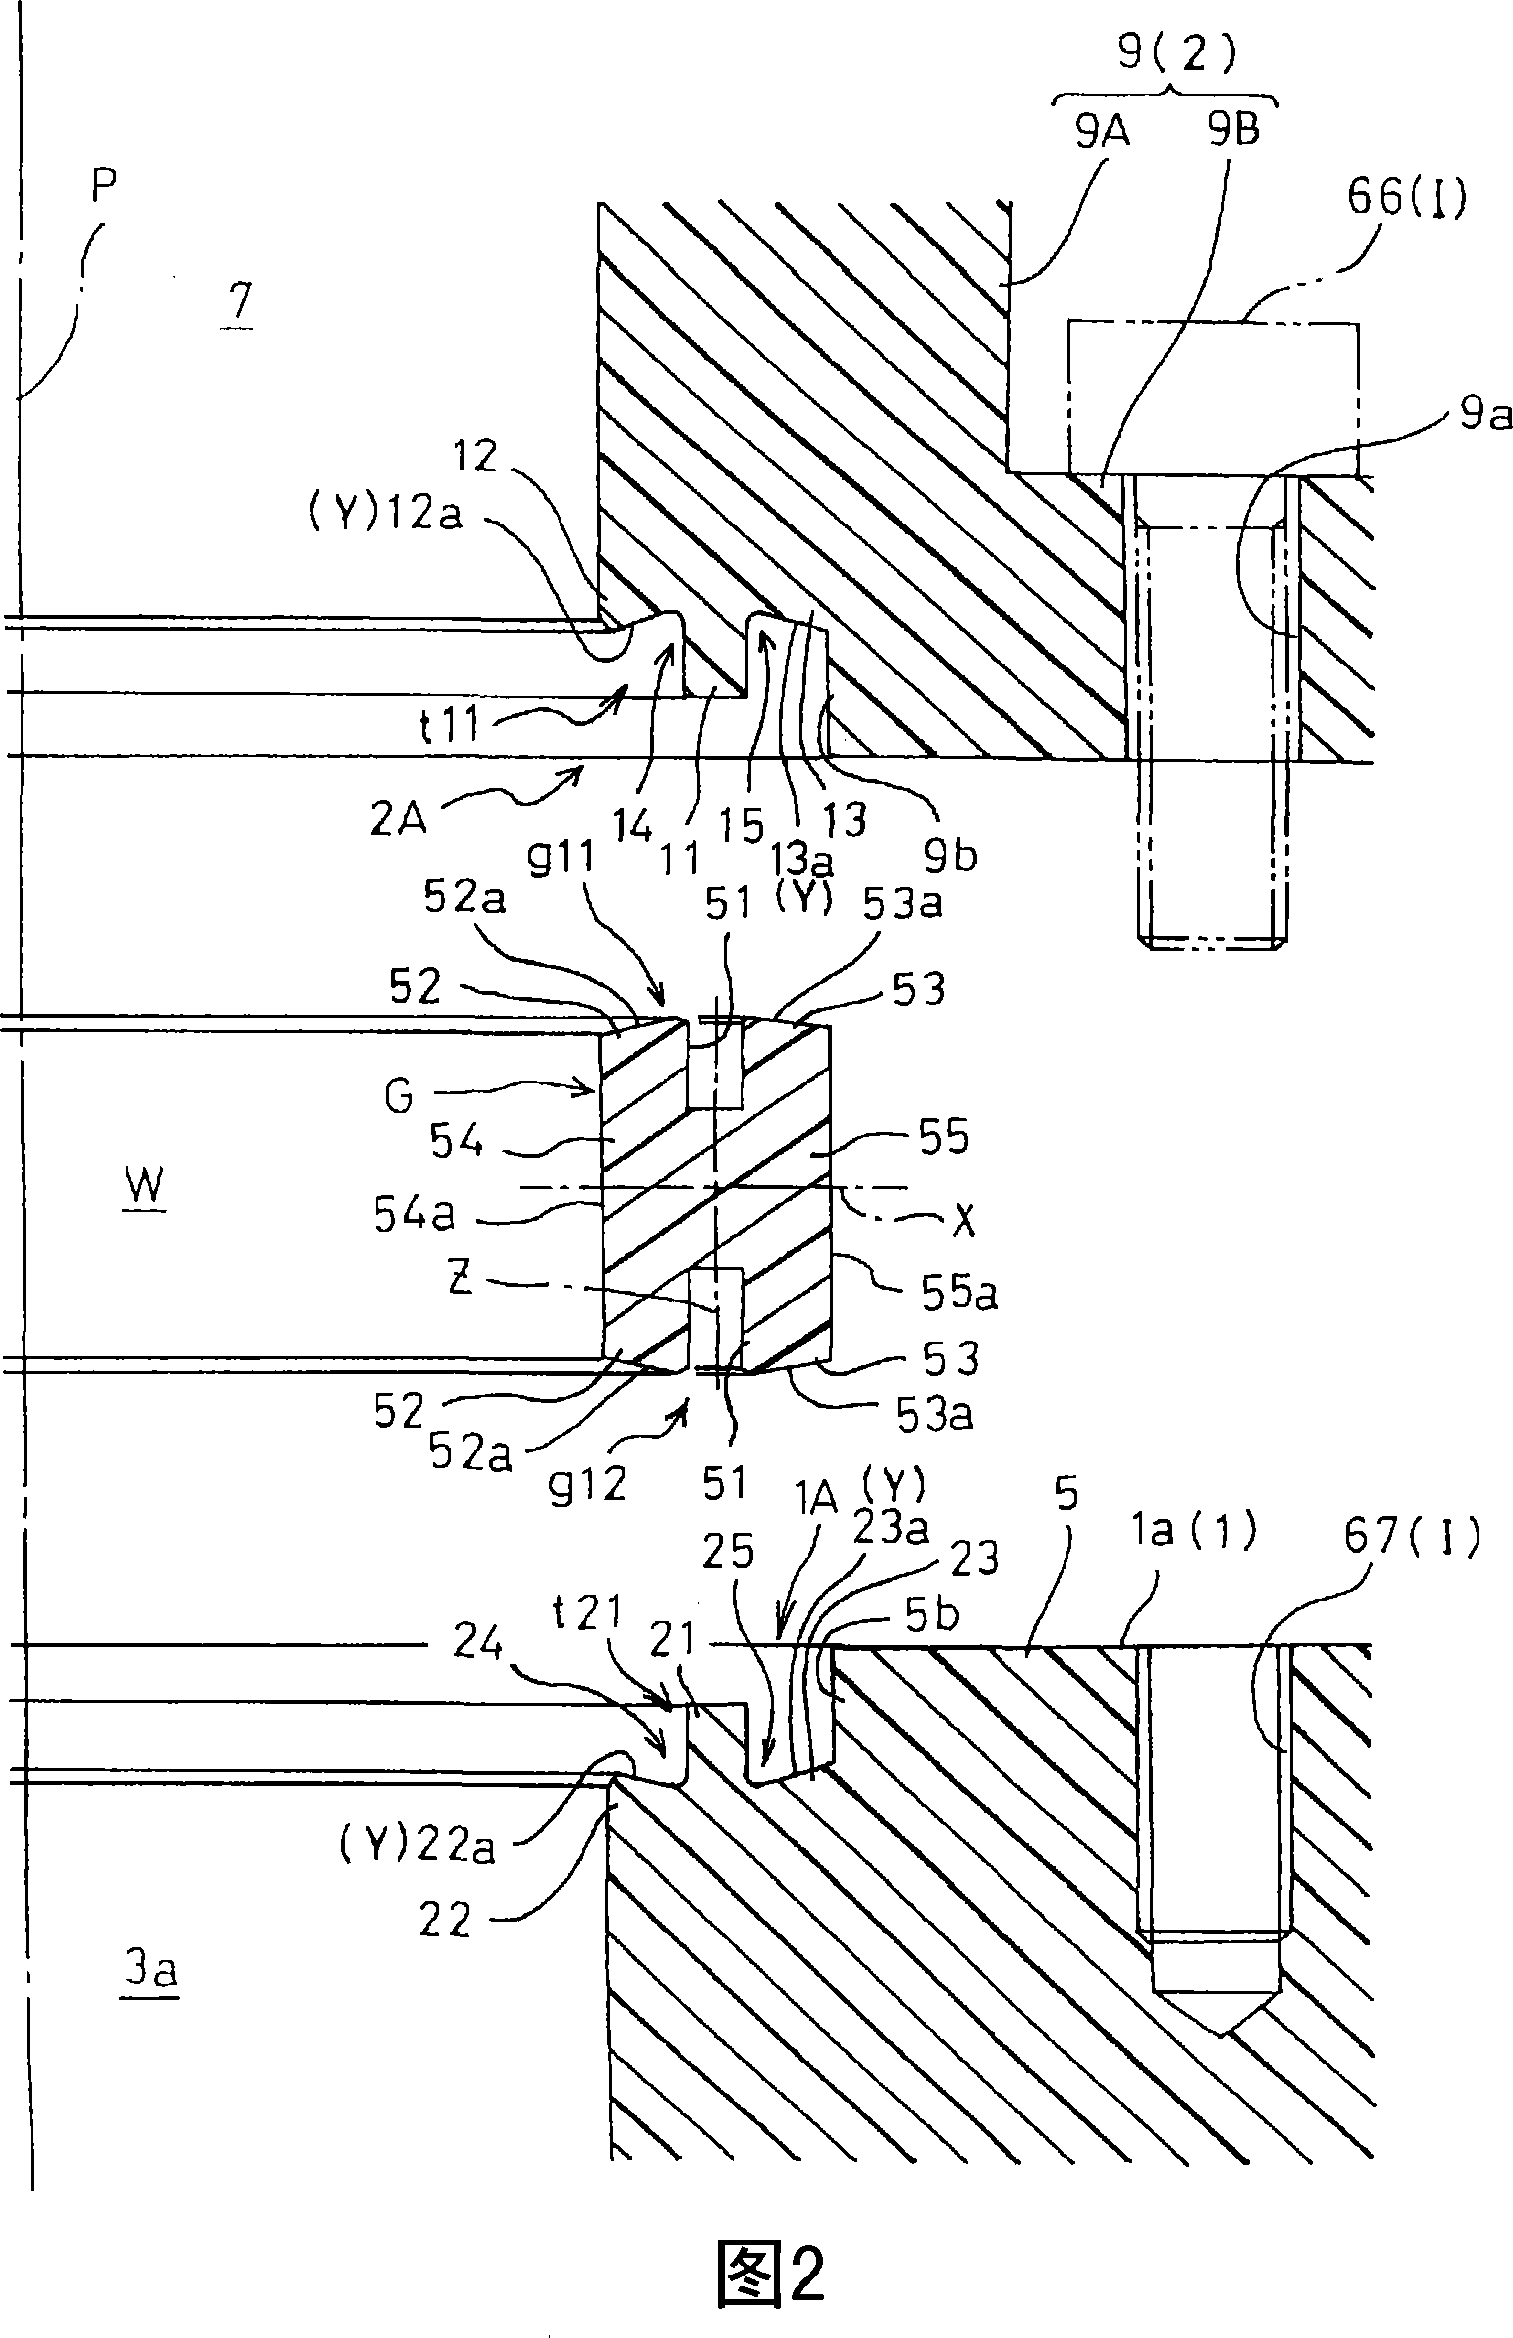 Connection structure of integrated panel and fluid device